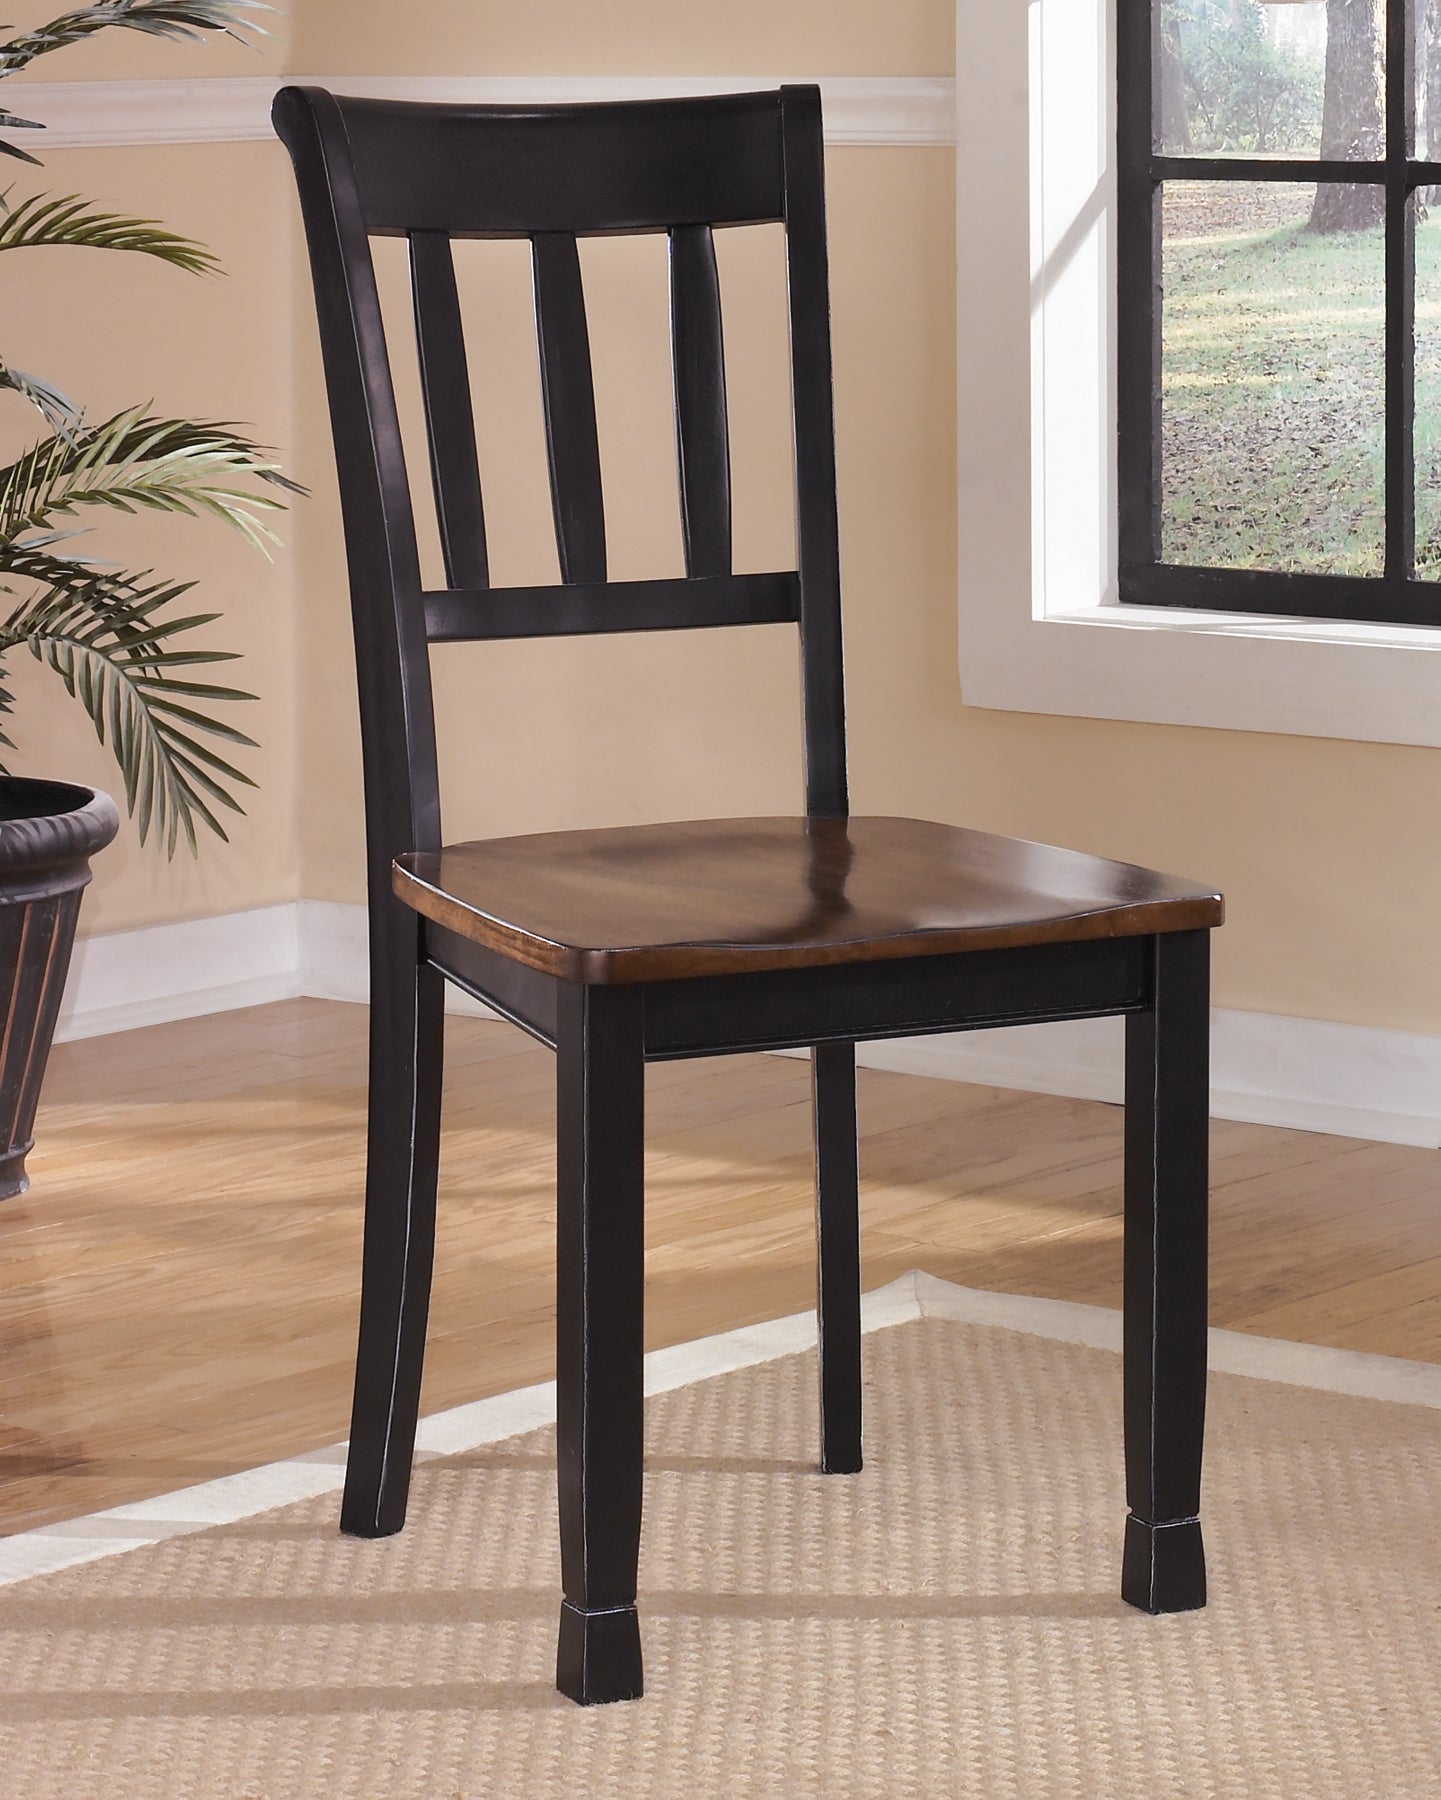 Owingsville Dining Table and 6 Chairs Rent Wise Rent To Own Jacksonville, Florida